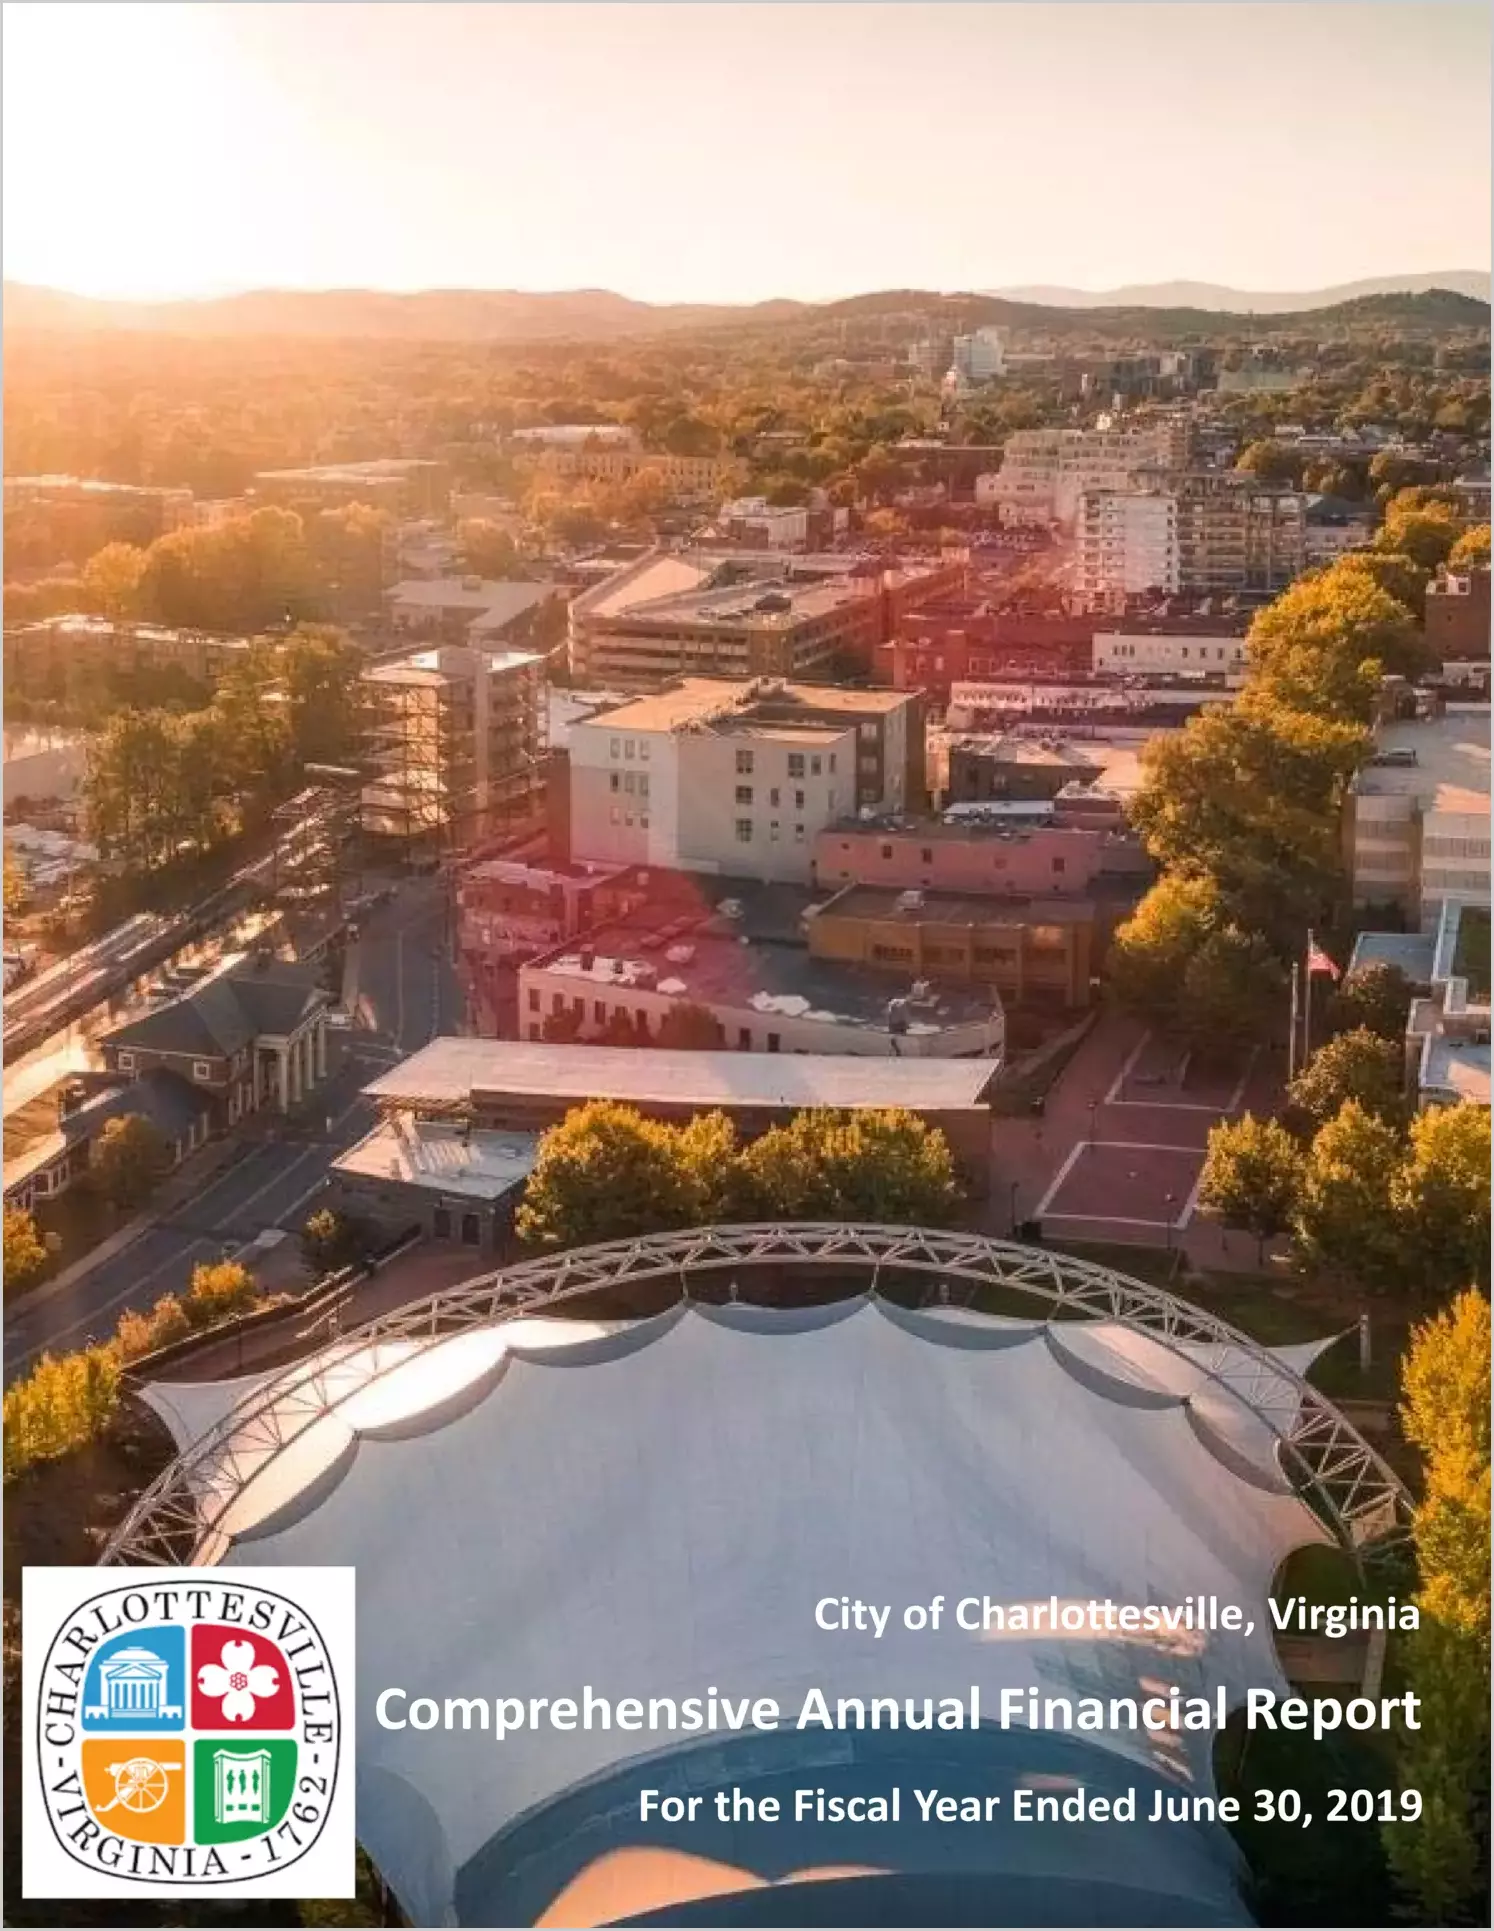 2019 Annual Financial Report for City of Charlottesville